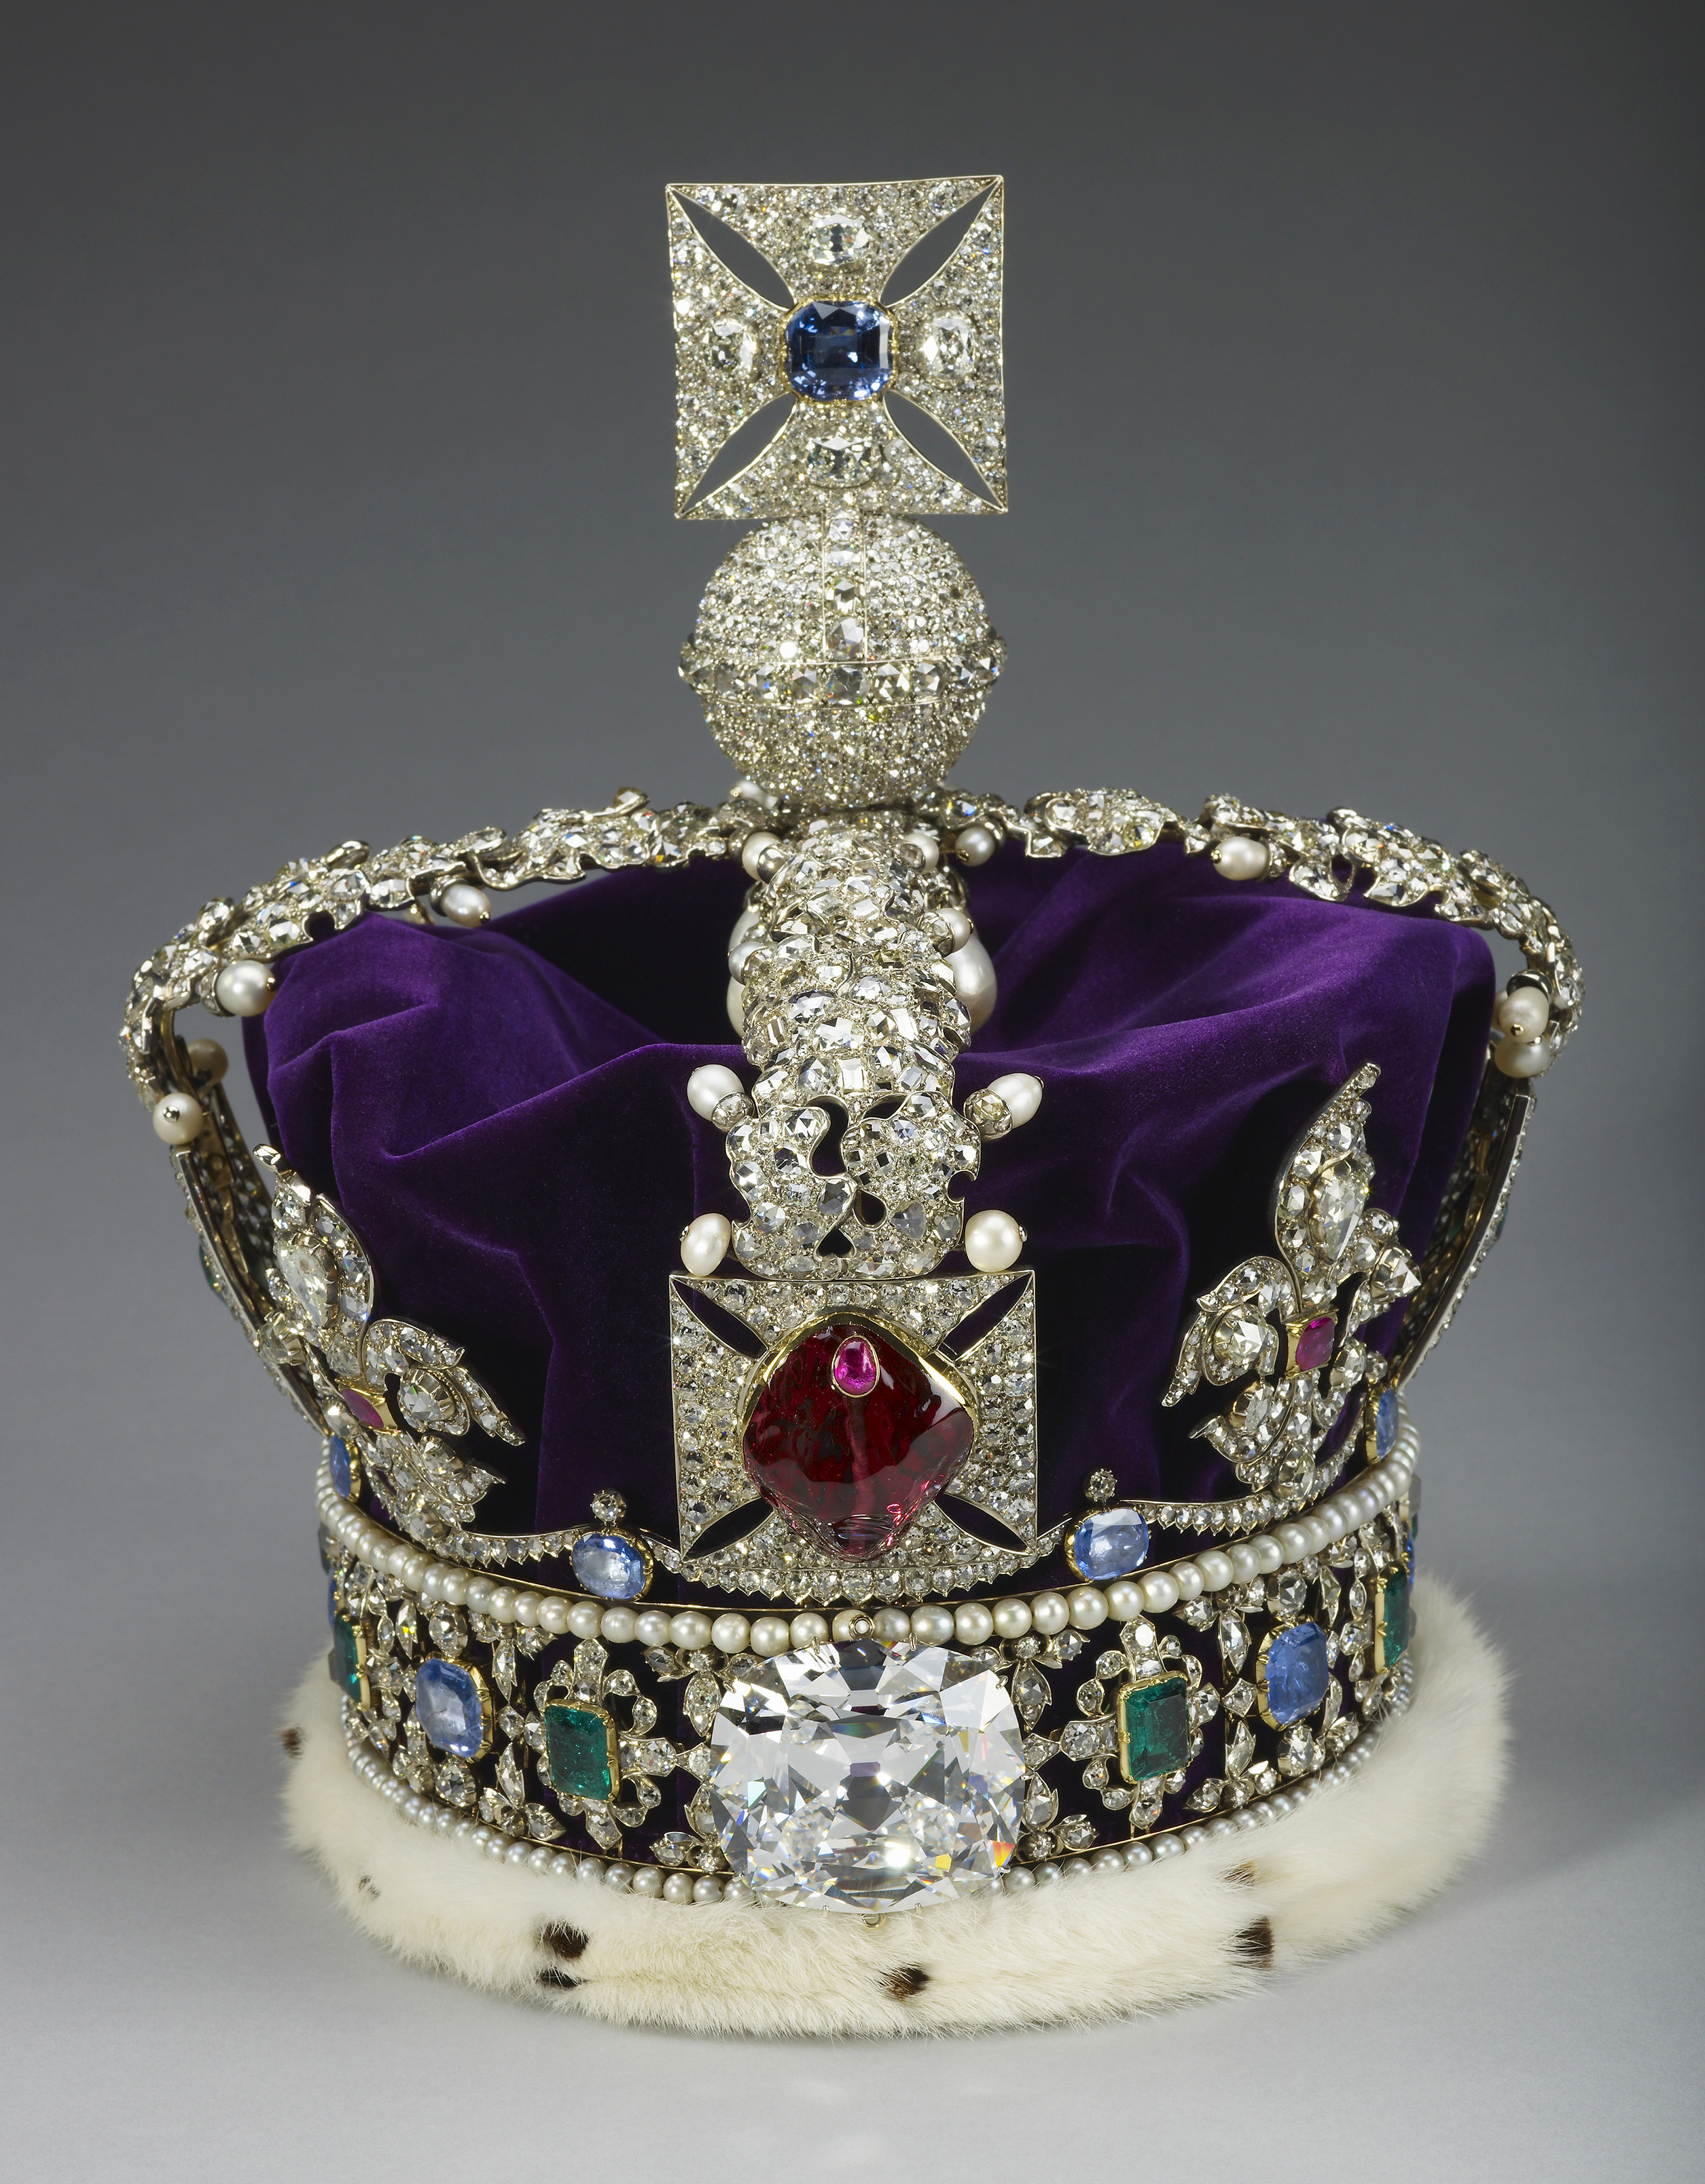 The Imperial State Crown which will be worn by King Charles II on his Coronation. 